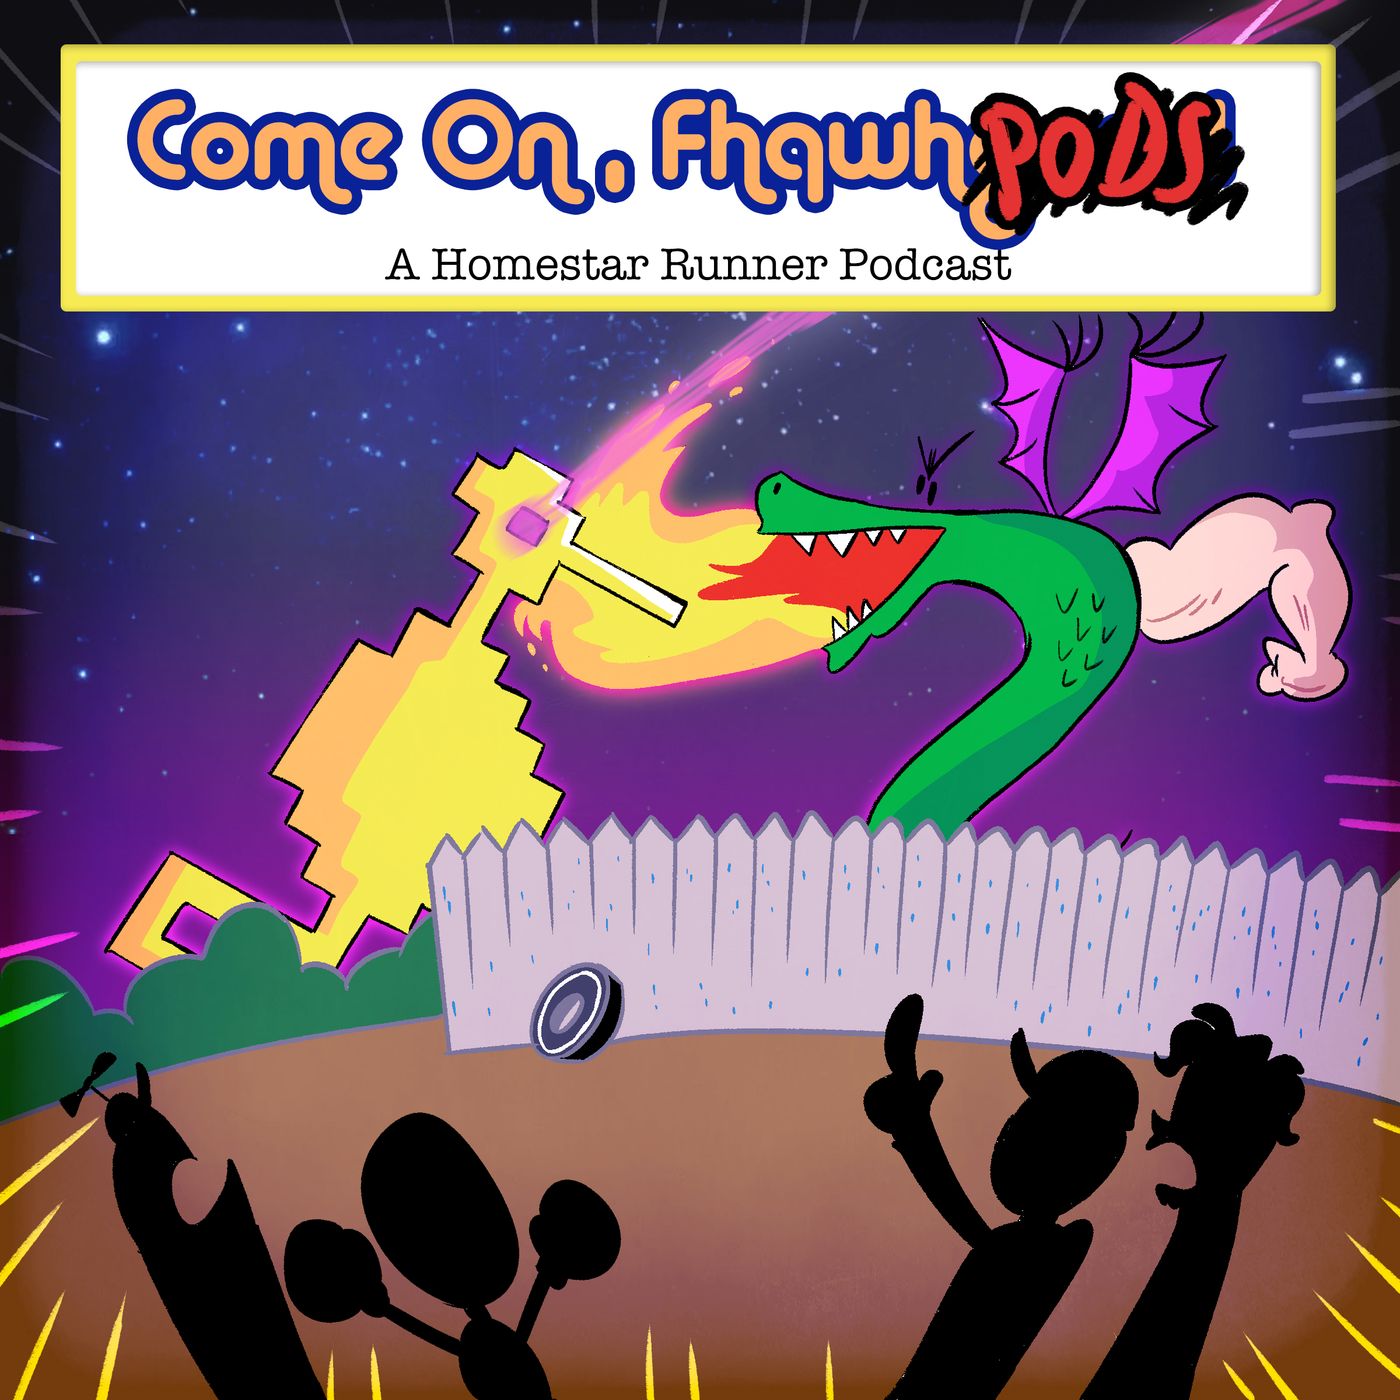 Come On, Fhqwhpods! – A Homestar Runner Podcast